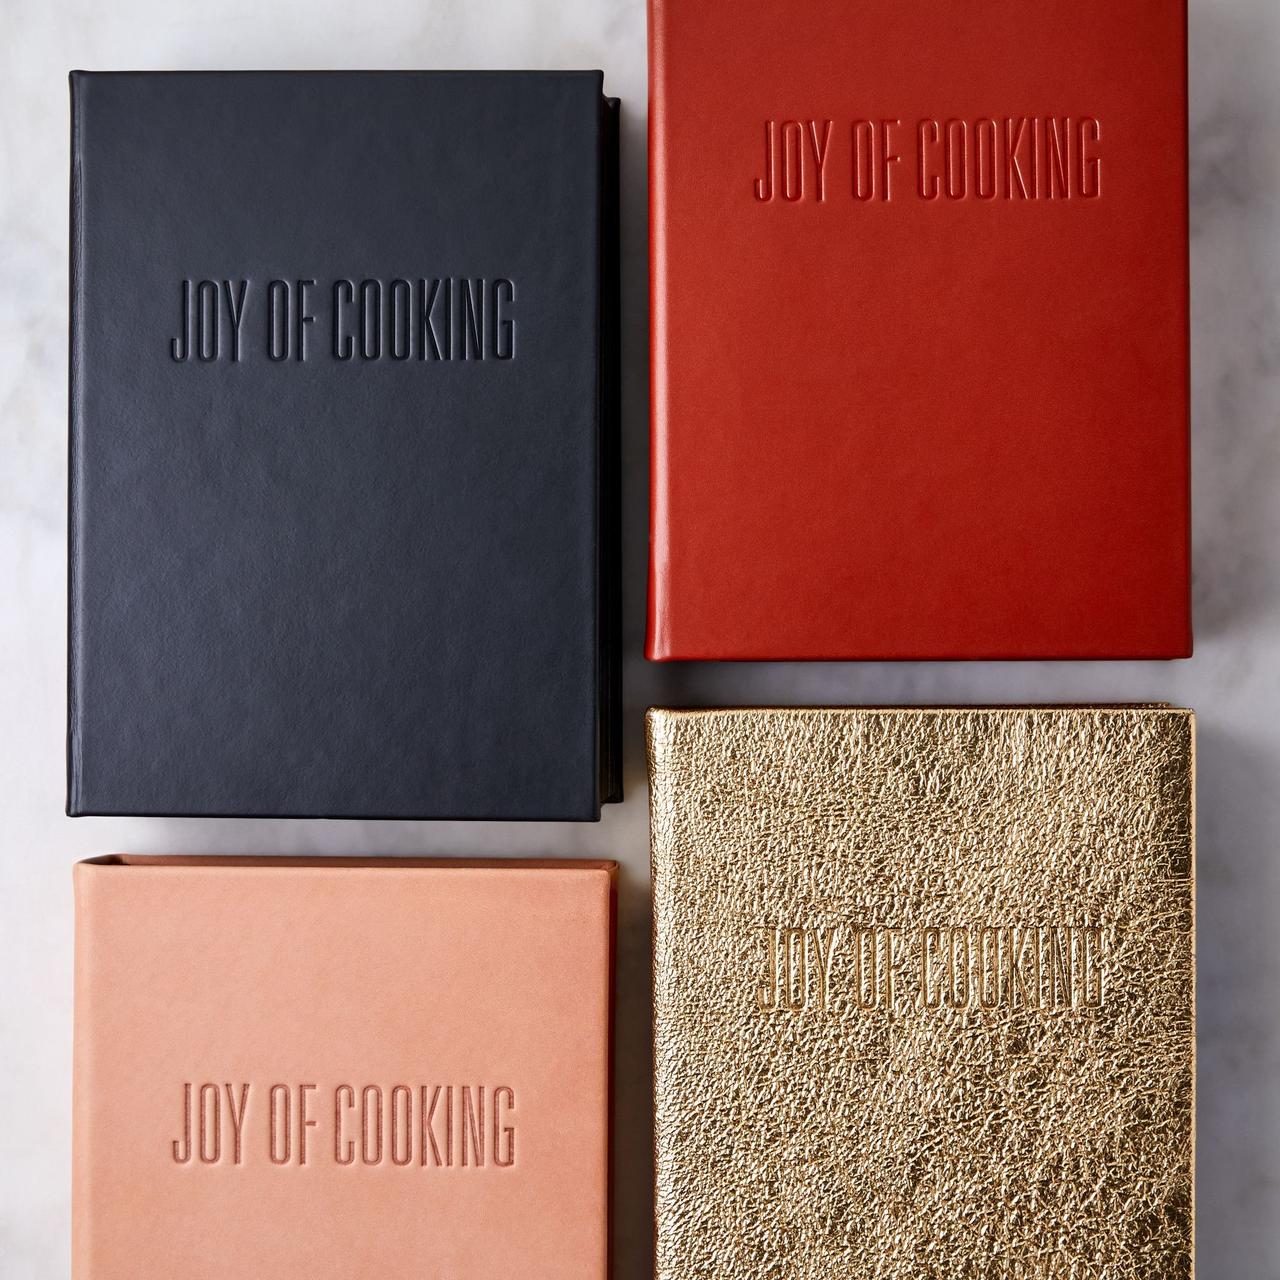 Beautiful leather-bound Joy of Cooking book first anniversary gift idea